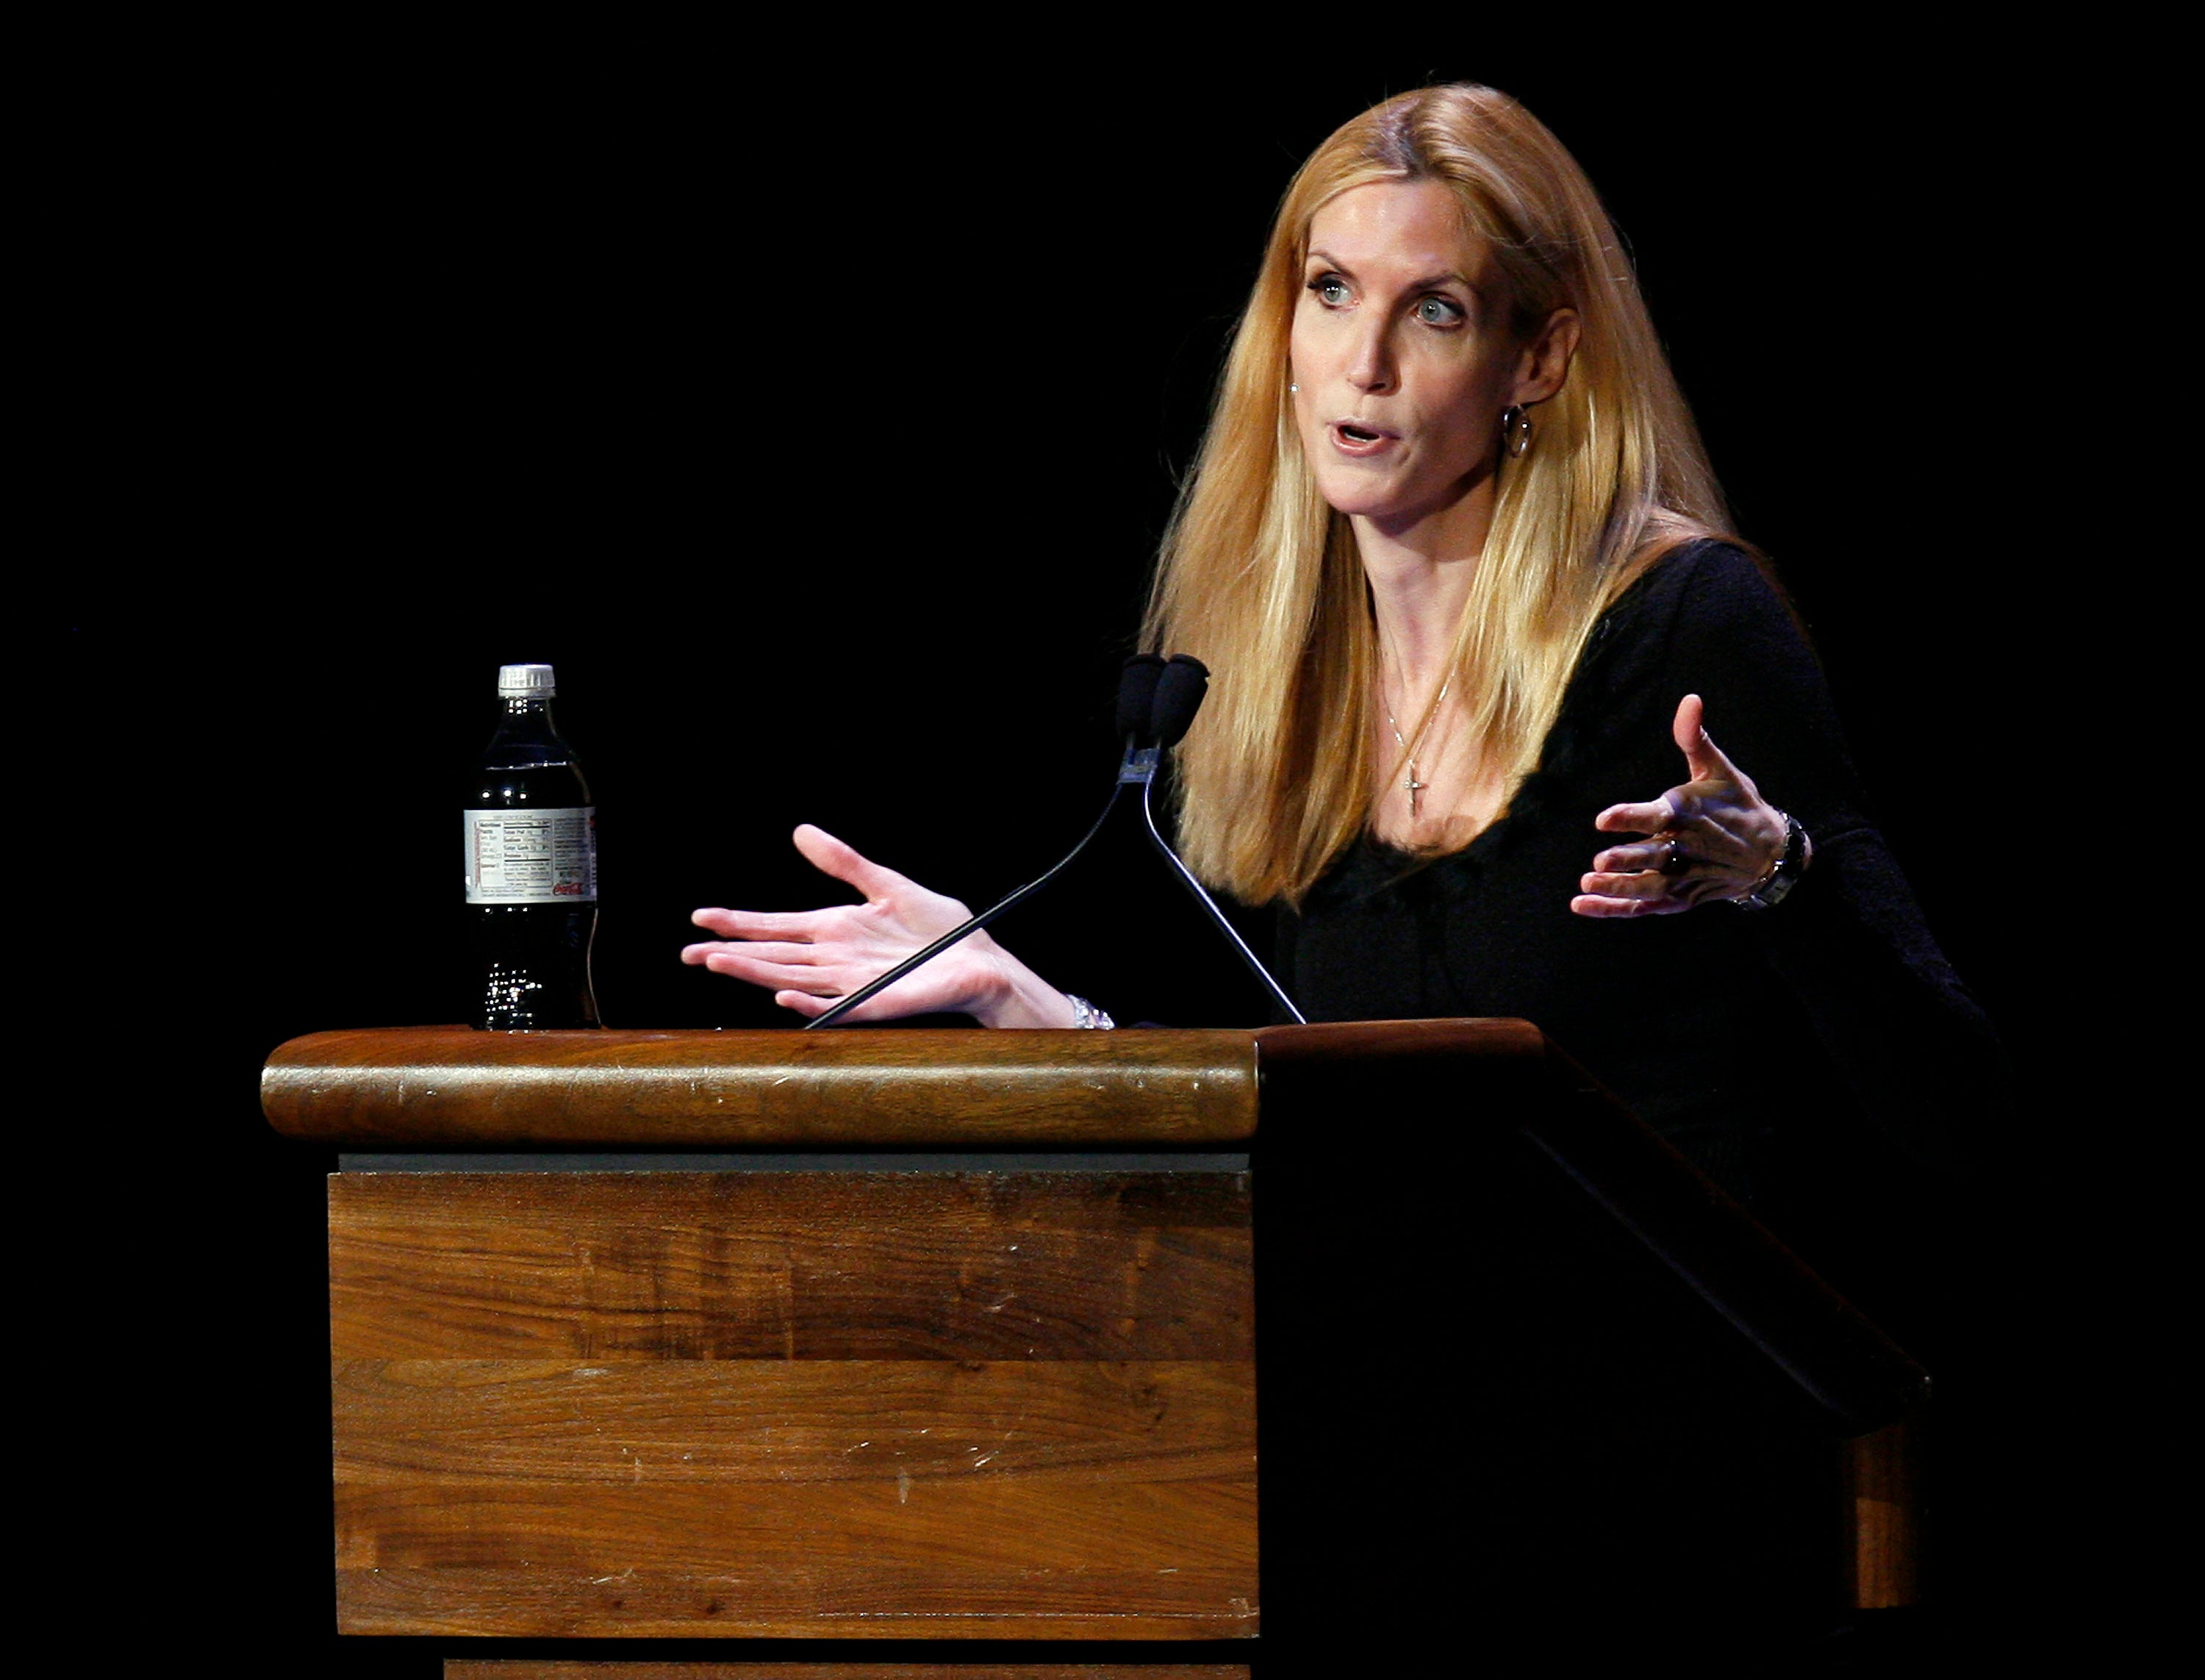 Ann Coulter says the Dr Kent Brantly was "idiotic" for travelling to Africa to help Ebola victims